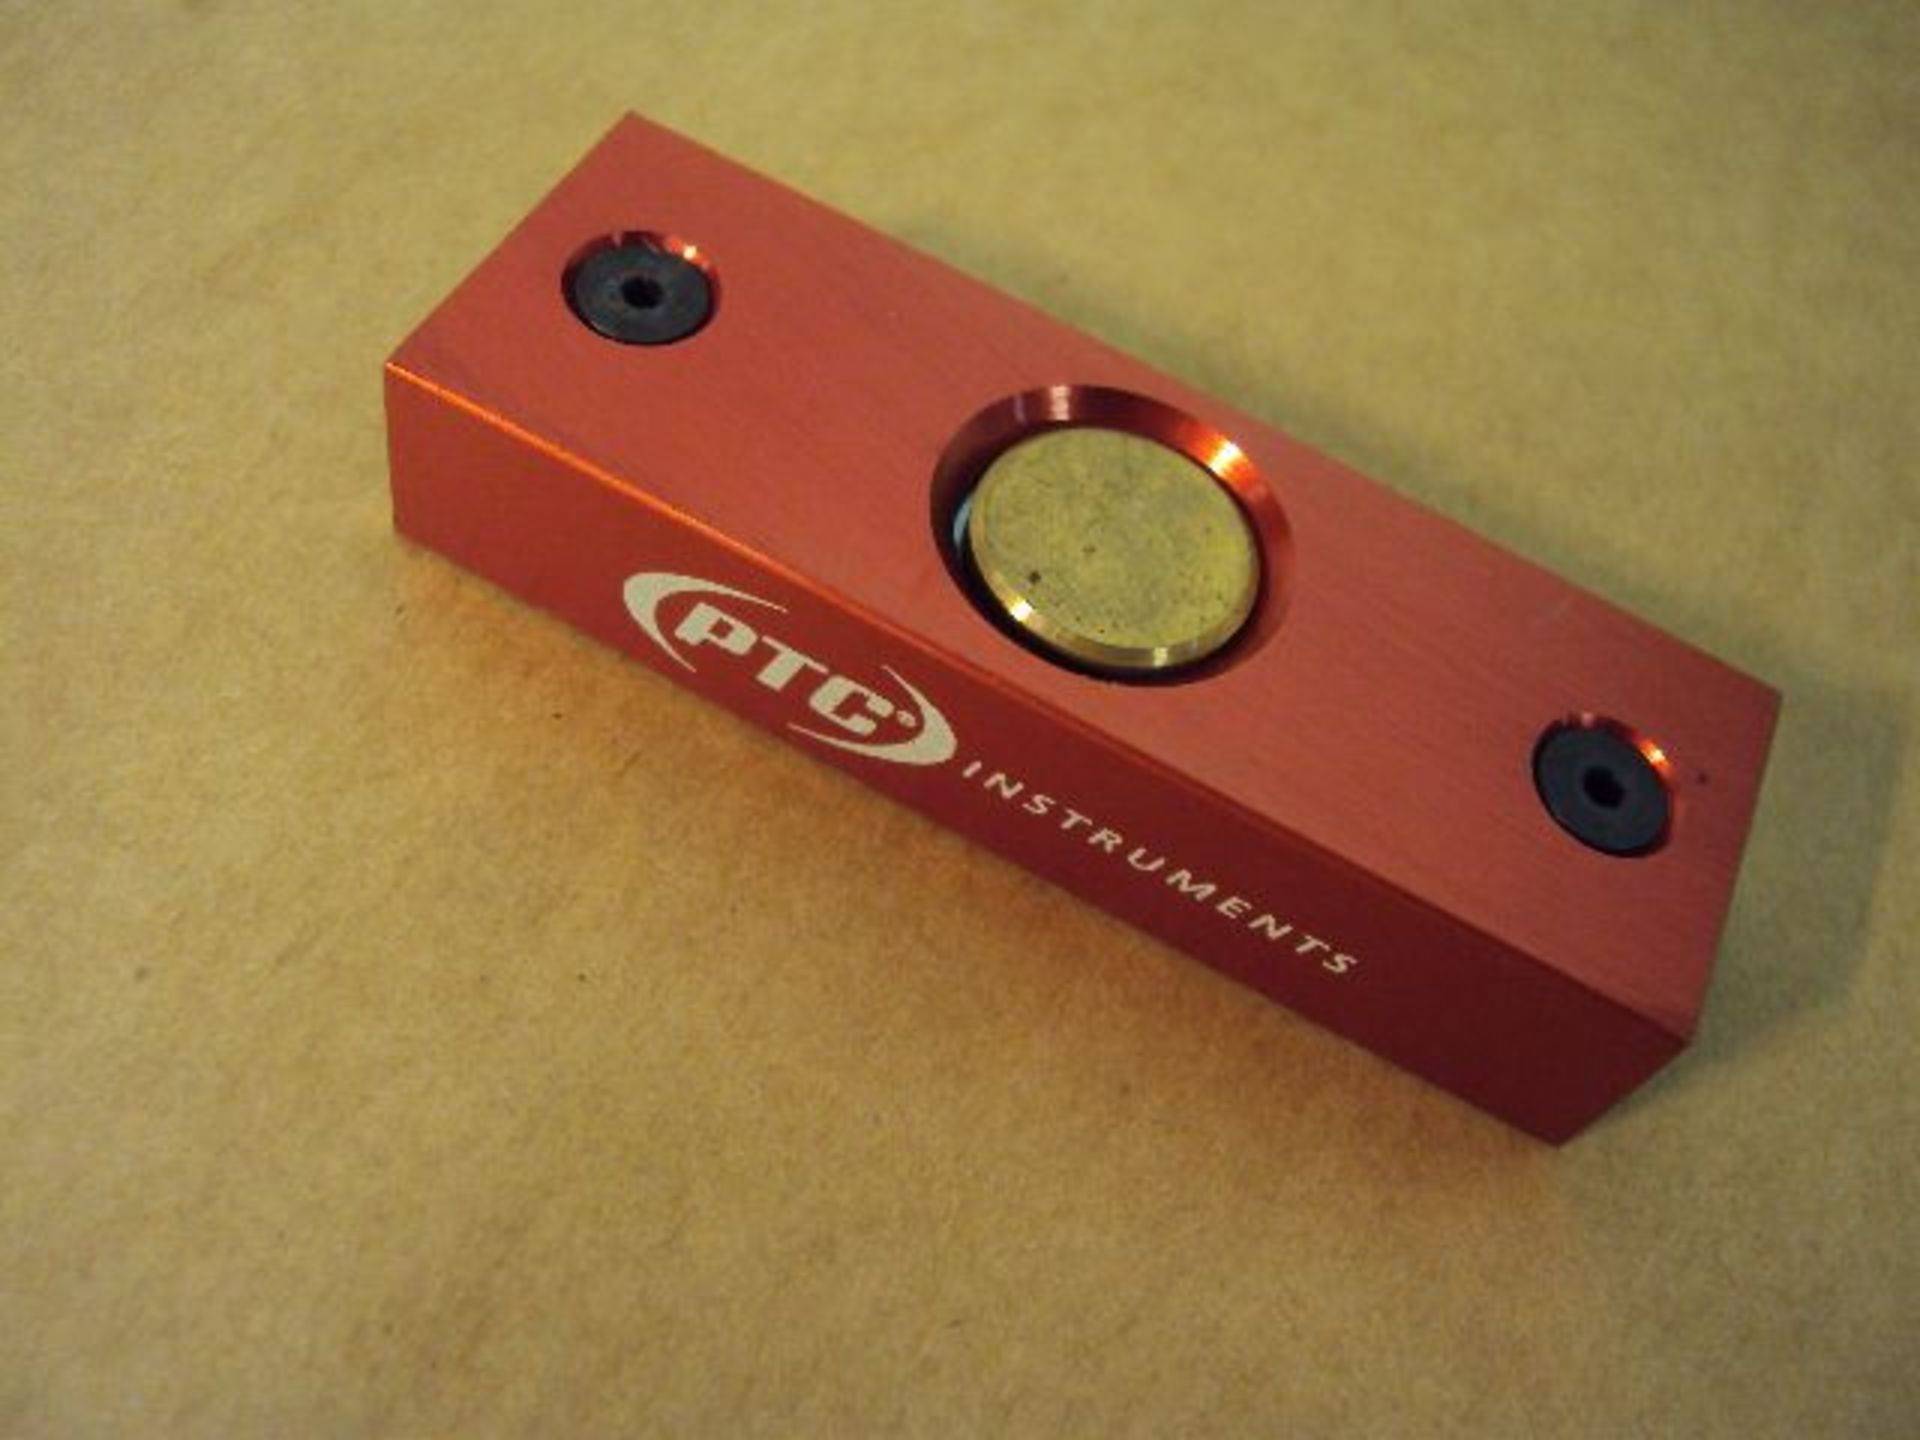 PTC Model 412 Tyoe 000 Durometer Hardness Tester with Test Standard in Padded Case - Image 3 of 5